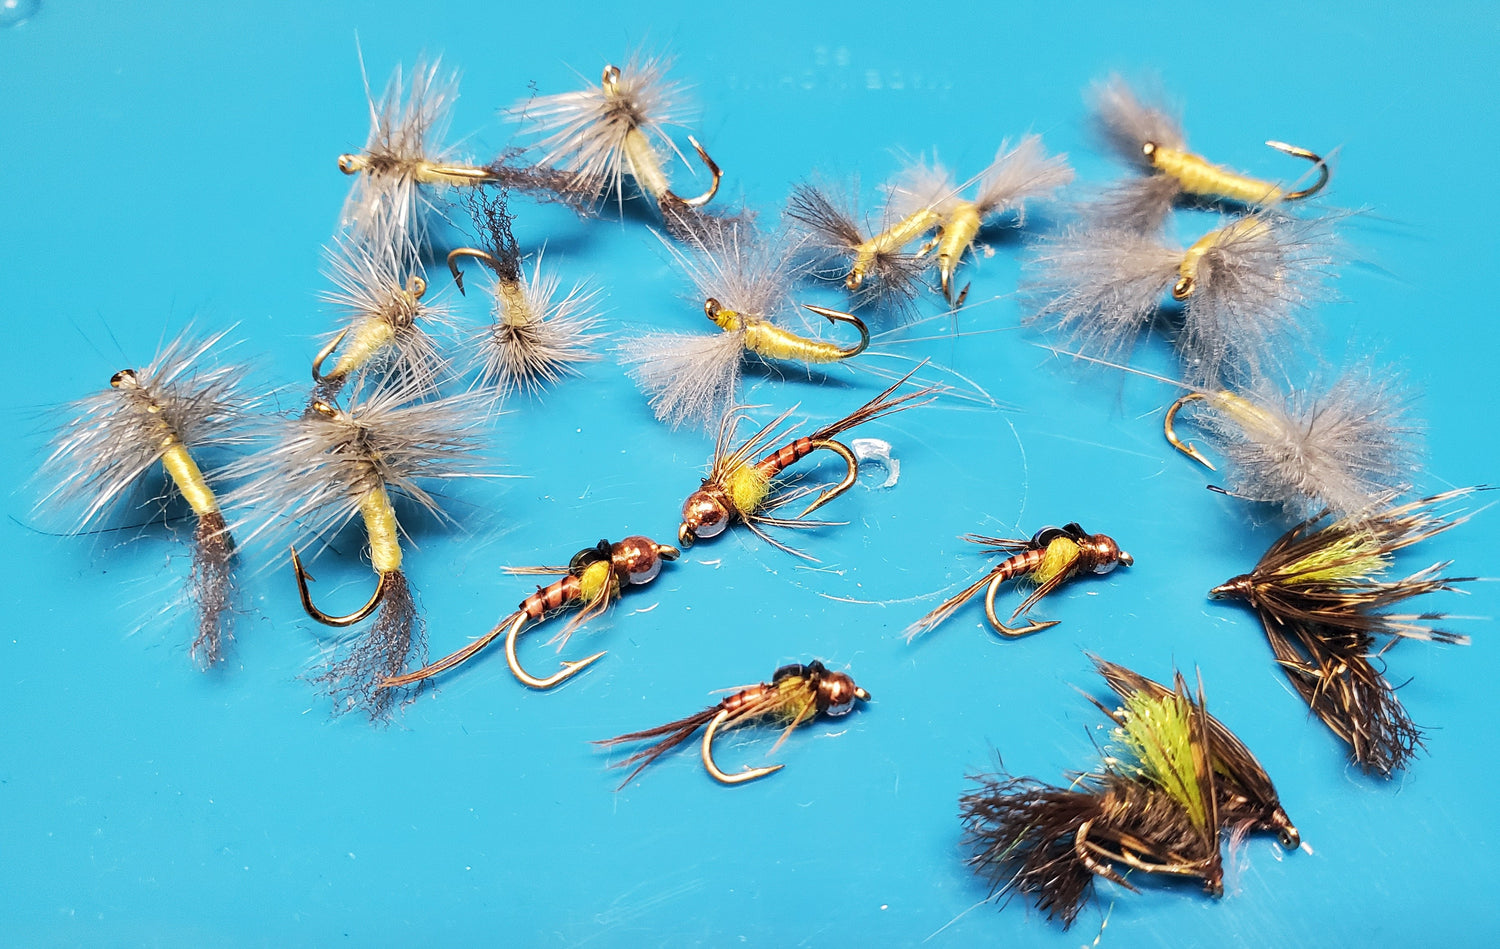 Sulfur Life Cycle Fly Selection, Sulfur Dry Fly, Sulfur Nymph